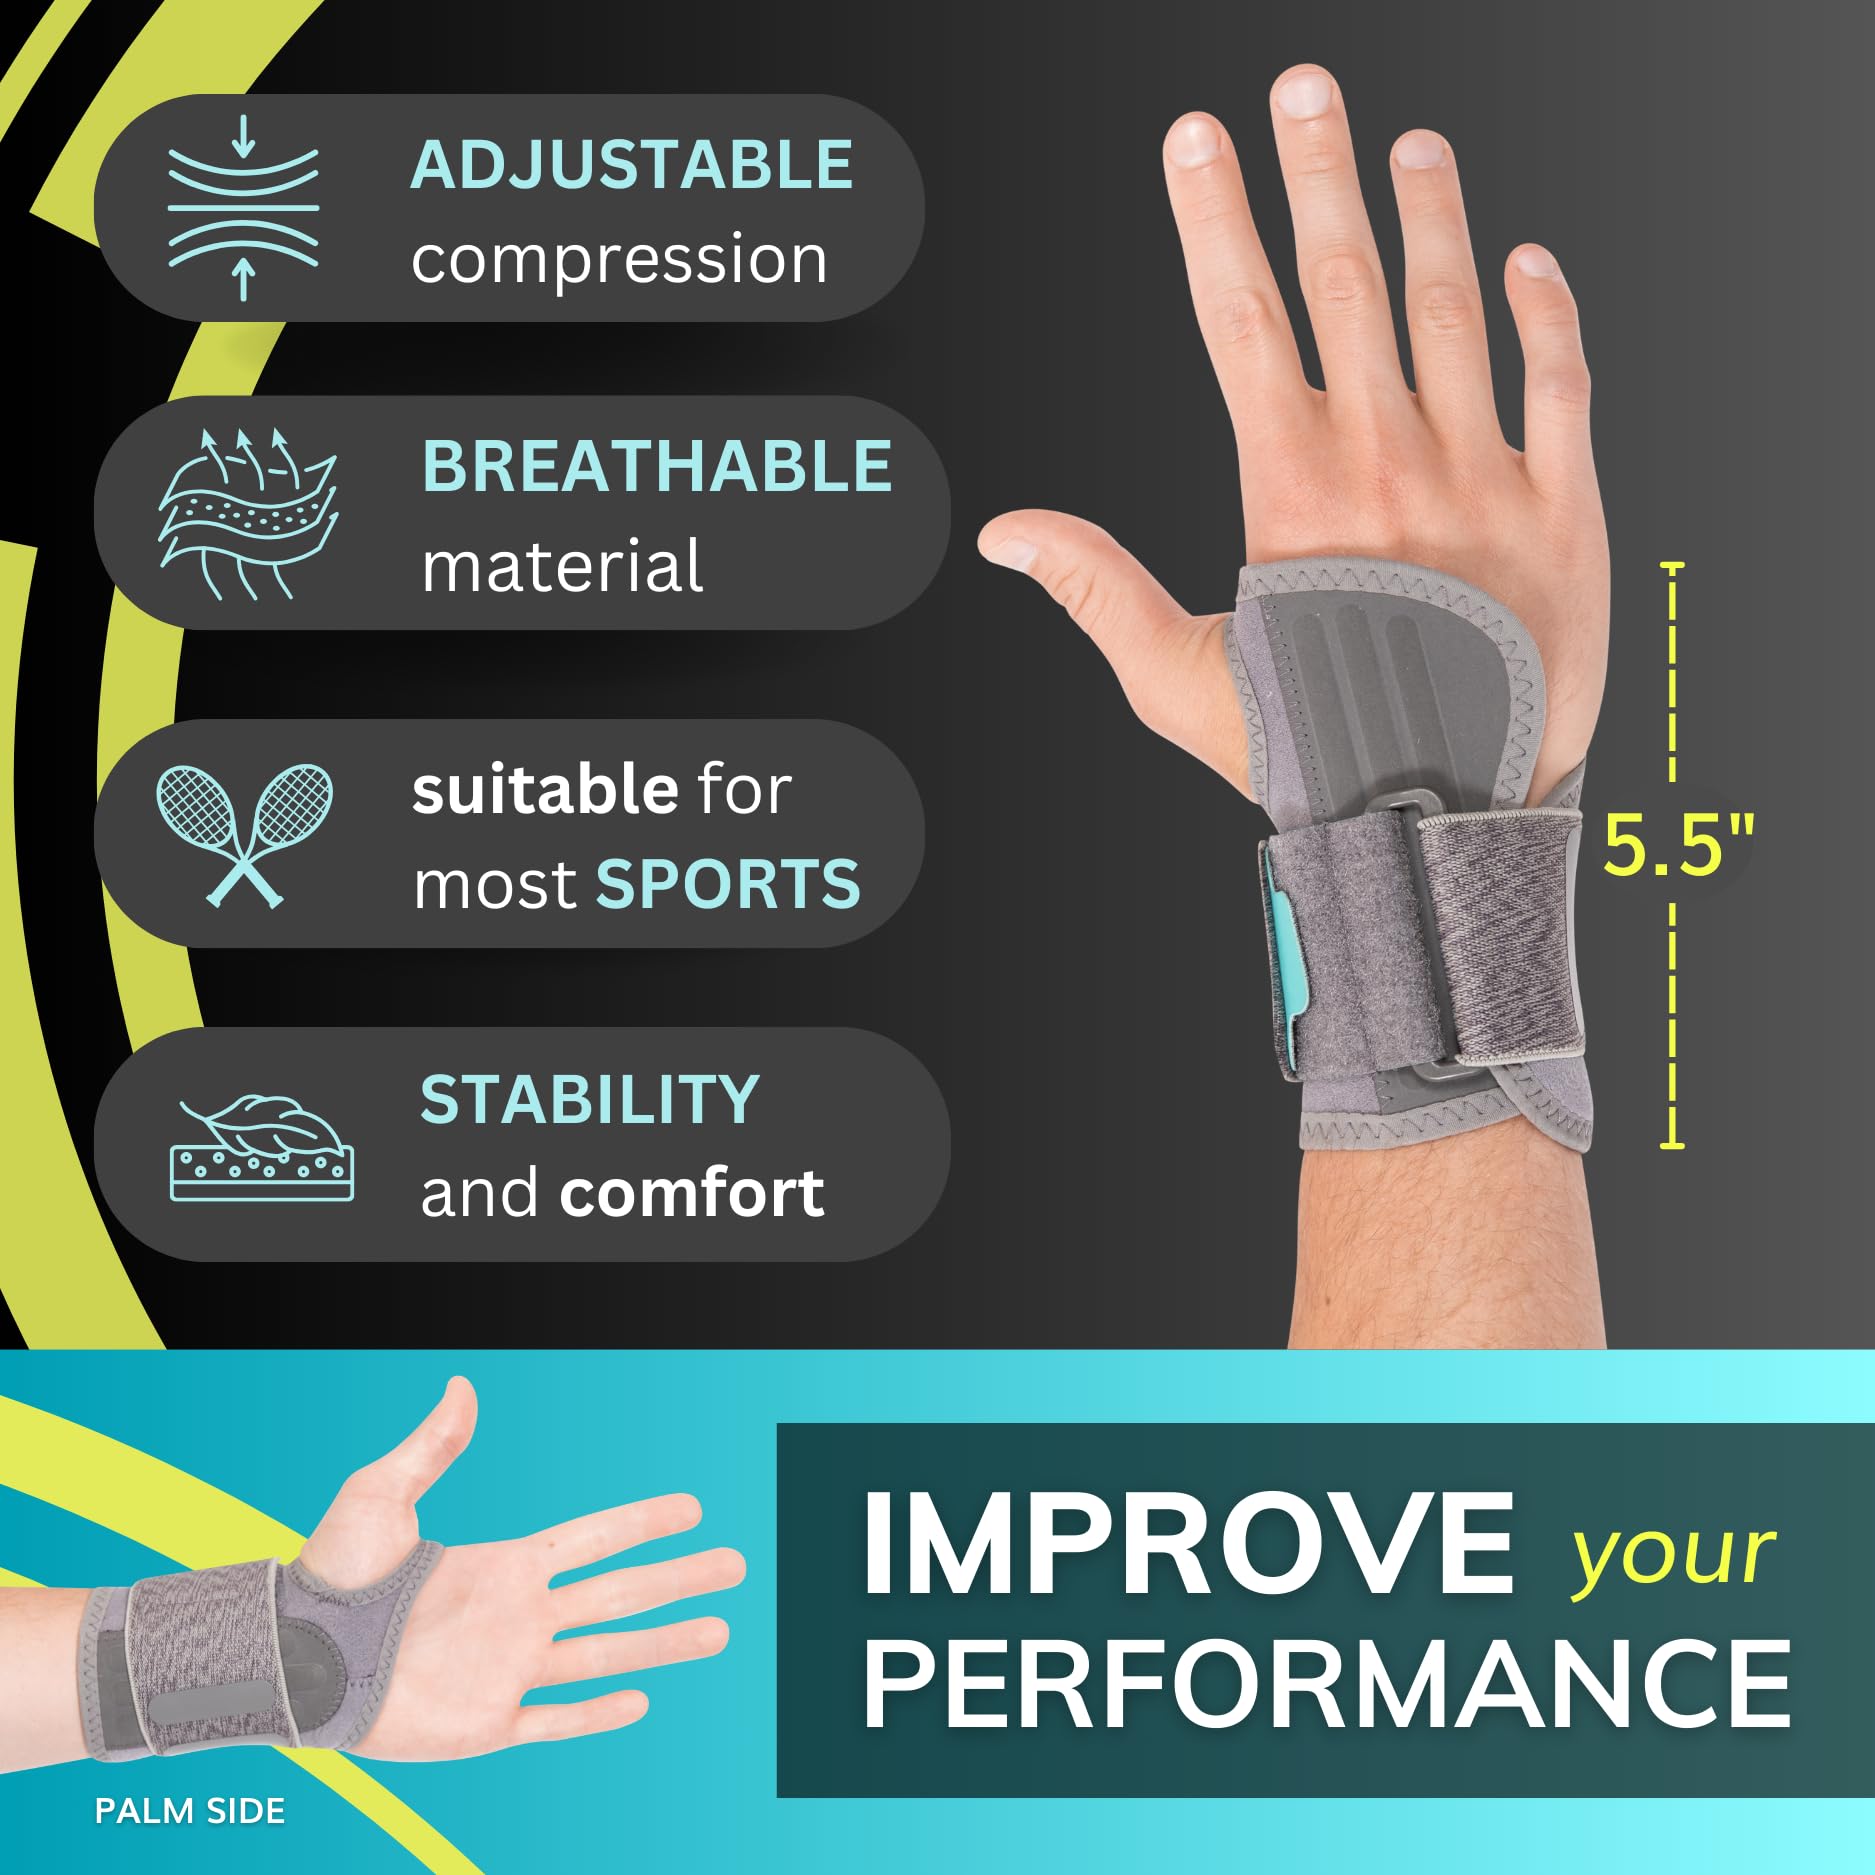 BraceAbility Court Comfort Wrist Brace - Athletic Tennis Wrist Support Wrap Compression Sleeve for Pickleball, Sprained Wrist, Tendonitis, Badminton, Racquet Sports Pain Relief Recovery (M - Right)